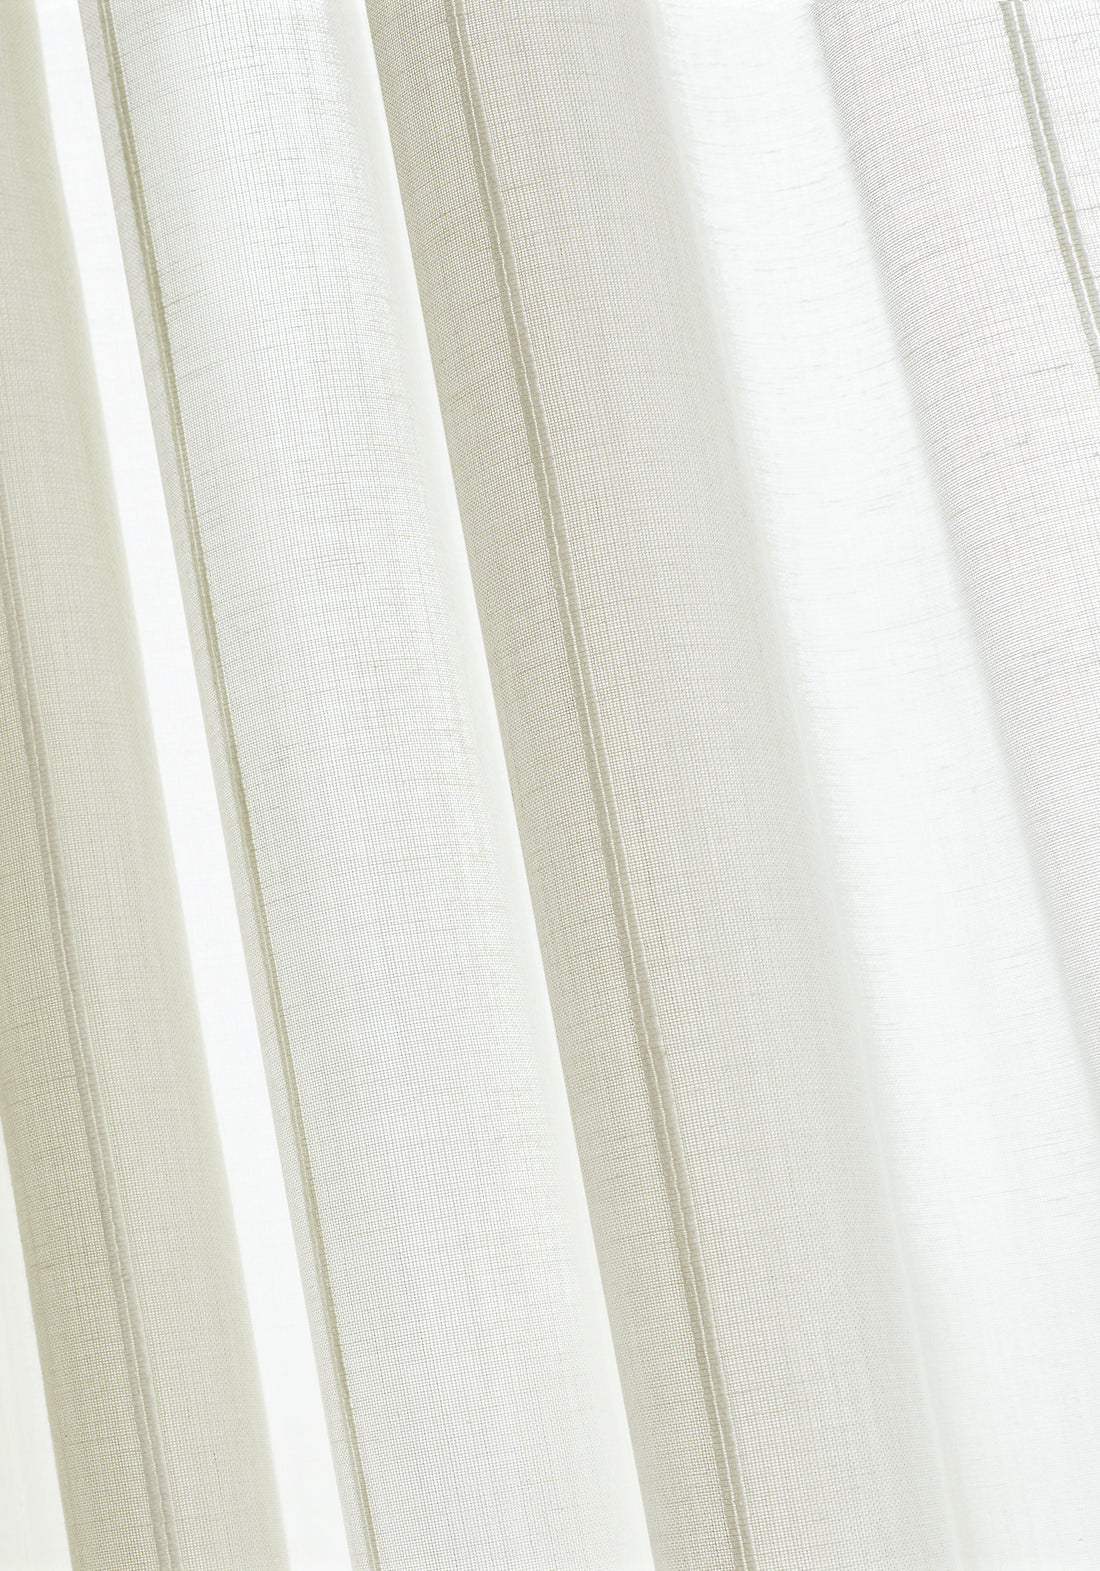 Detail of Berkshire Stripe woven fabric in Ivory by Thibaut